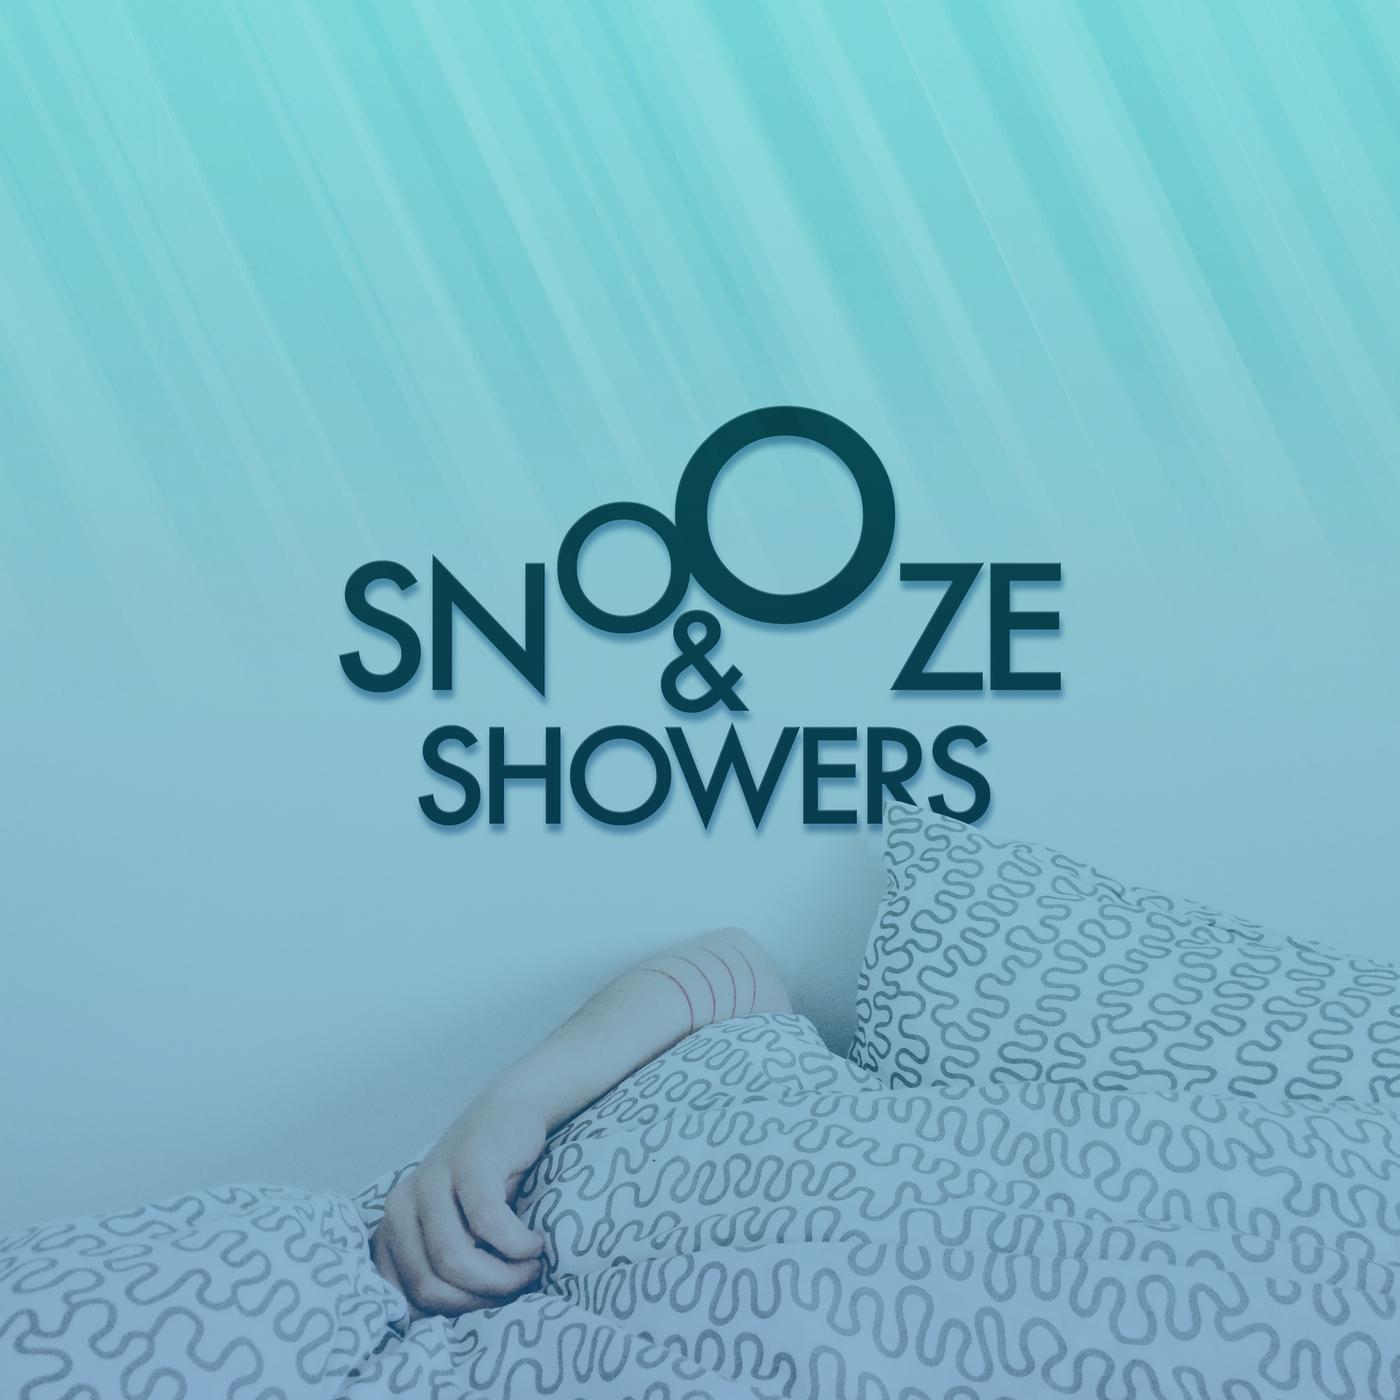 Snooze & Showers